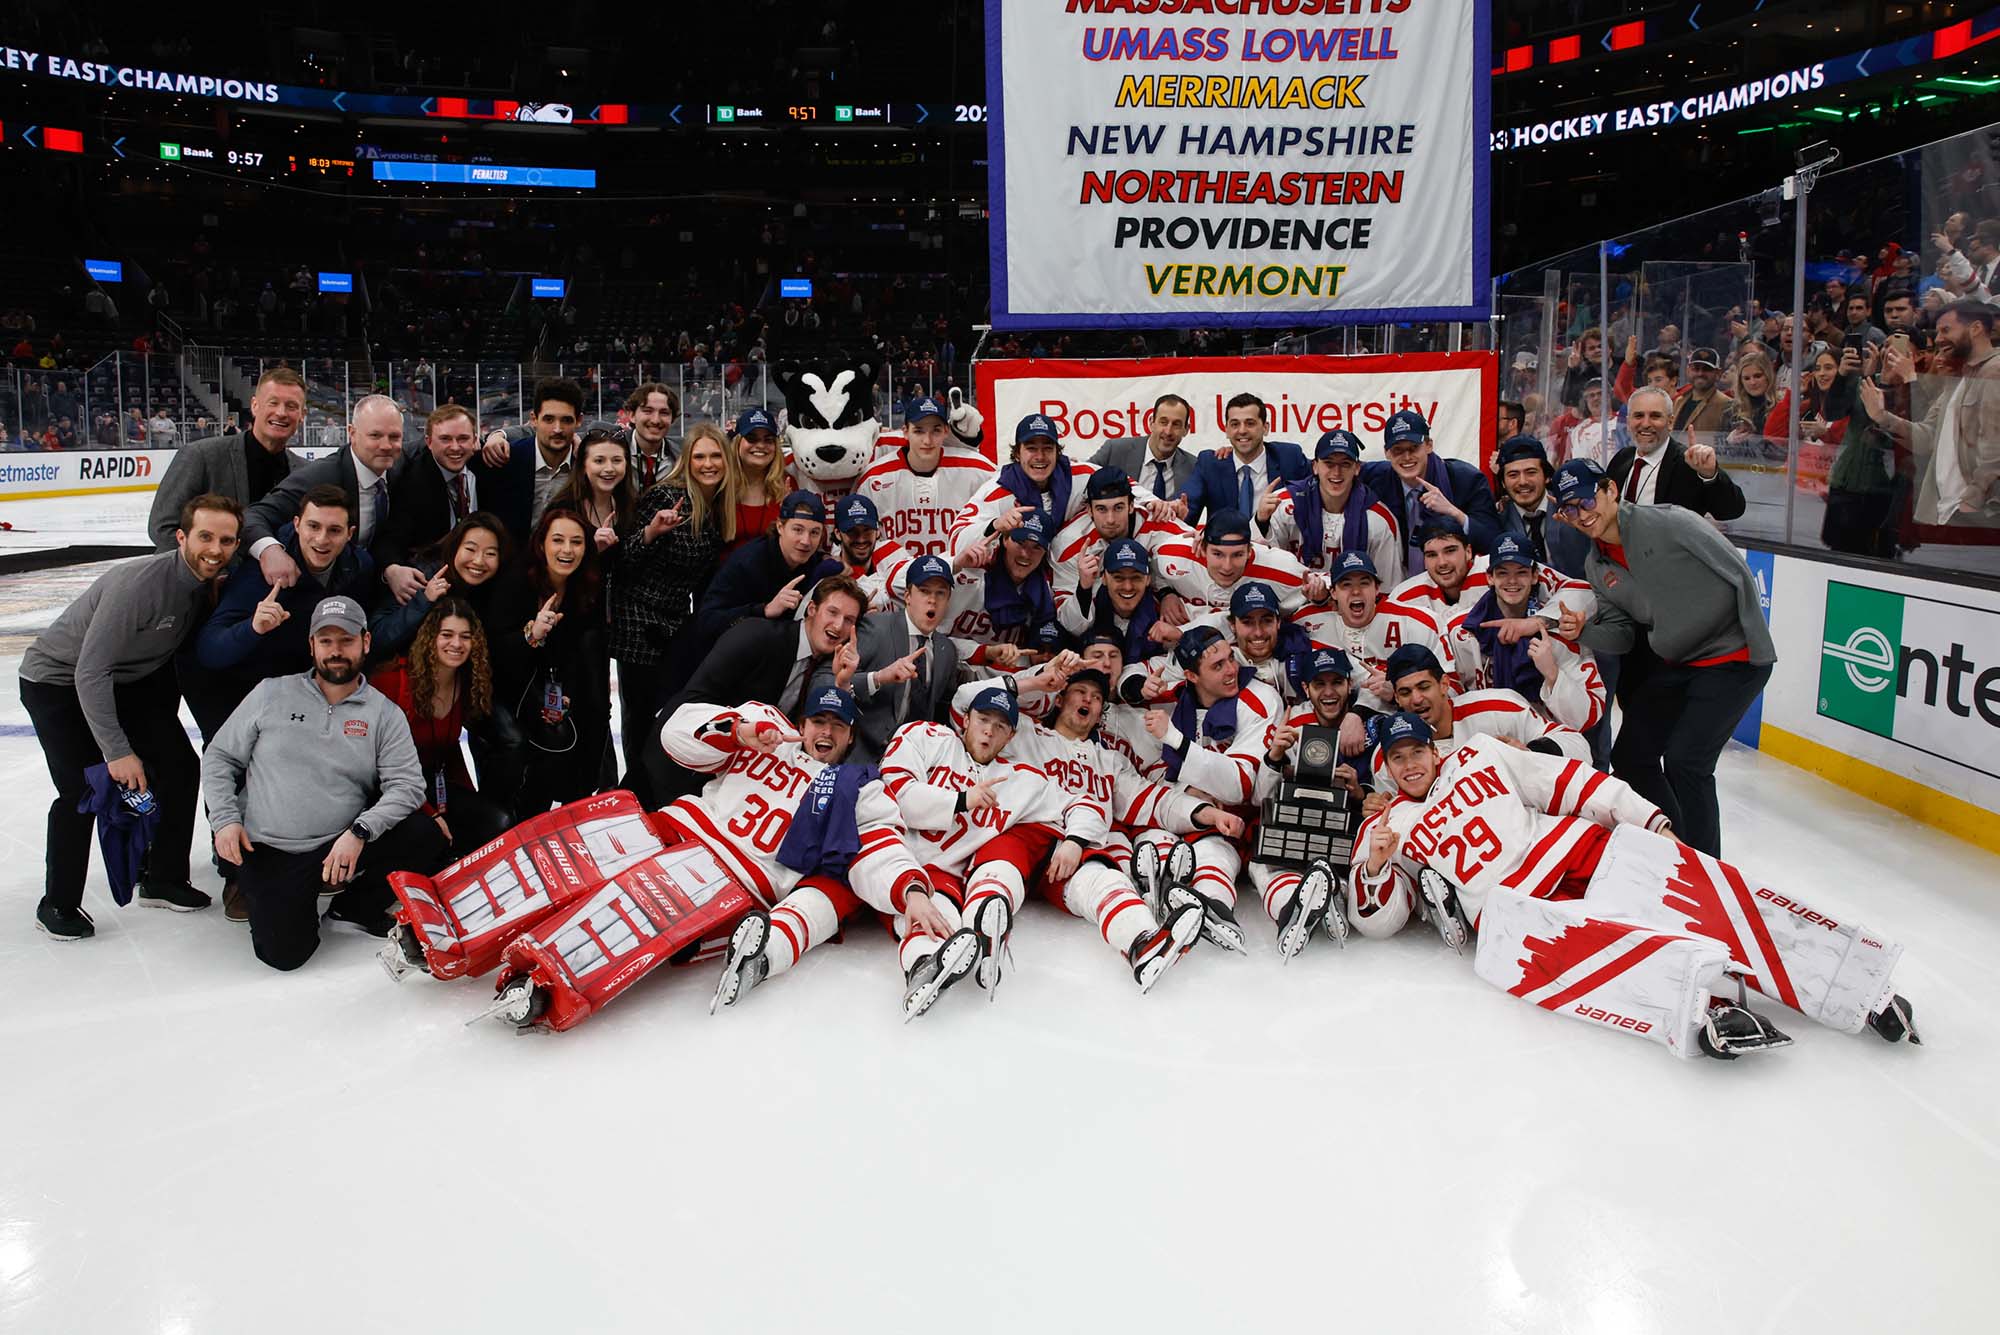 Photo: The entire BU Men's Hockey team pose in celebration after winning their 10th Hockey East championship. The staff are in all black while the players are in their white with red detailing uniform.